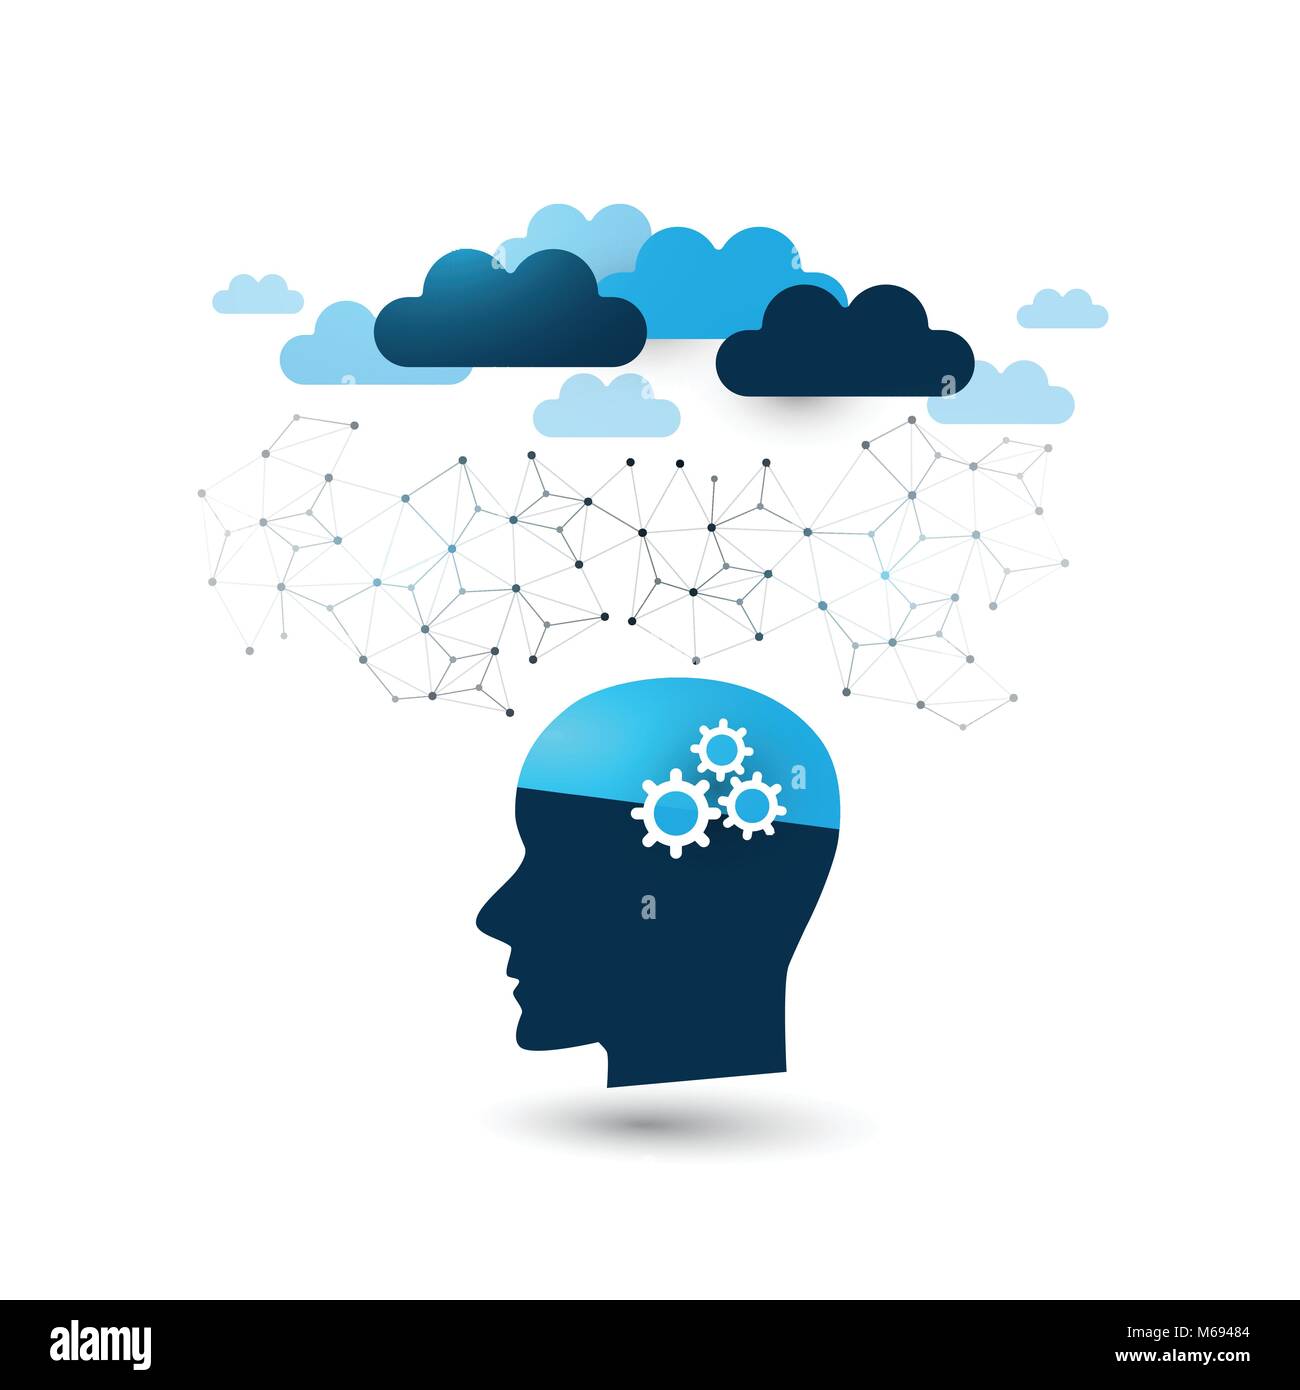 Machine Learning, Artificial Intelligence, Cloud Computing, Digital Support Assistance and Networks Design Concept with Clouds and Human Head Stock Vector